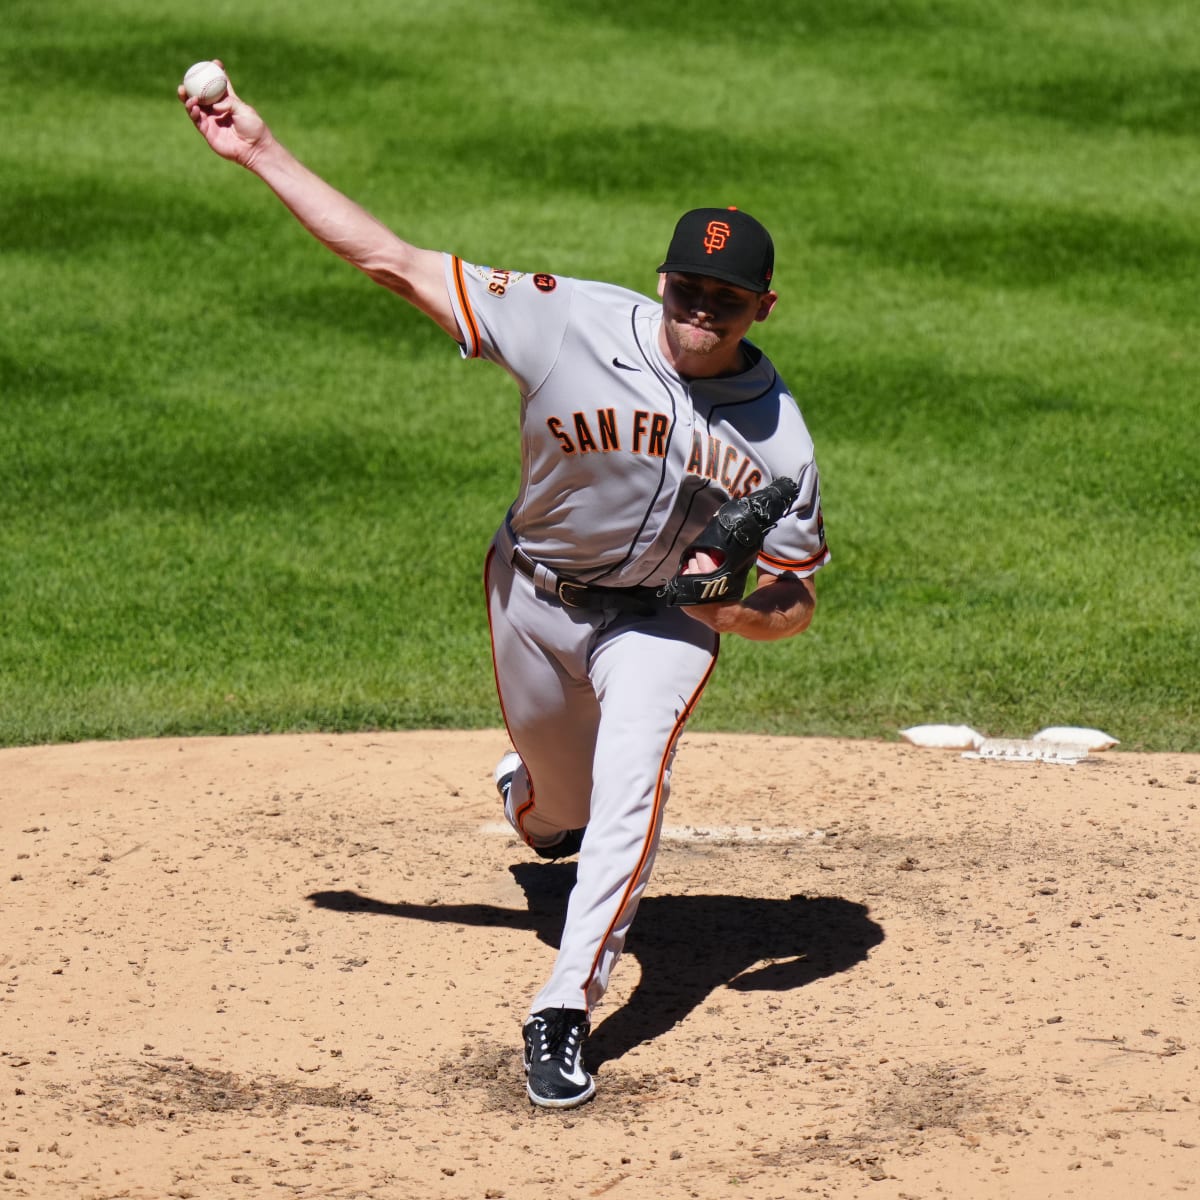 SF Giants lose first game of doubleheader against Rockies 9-5